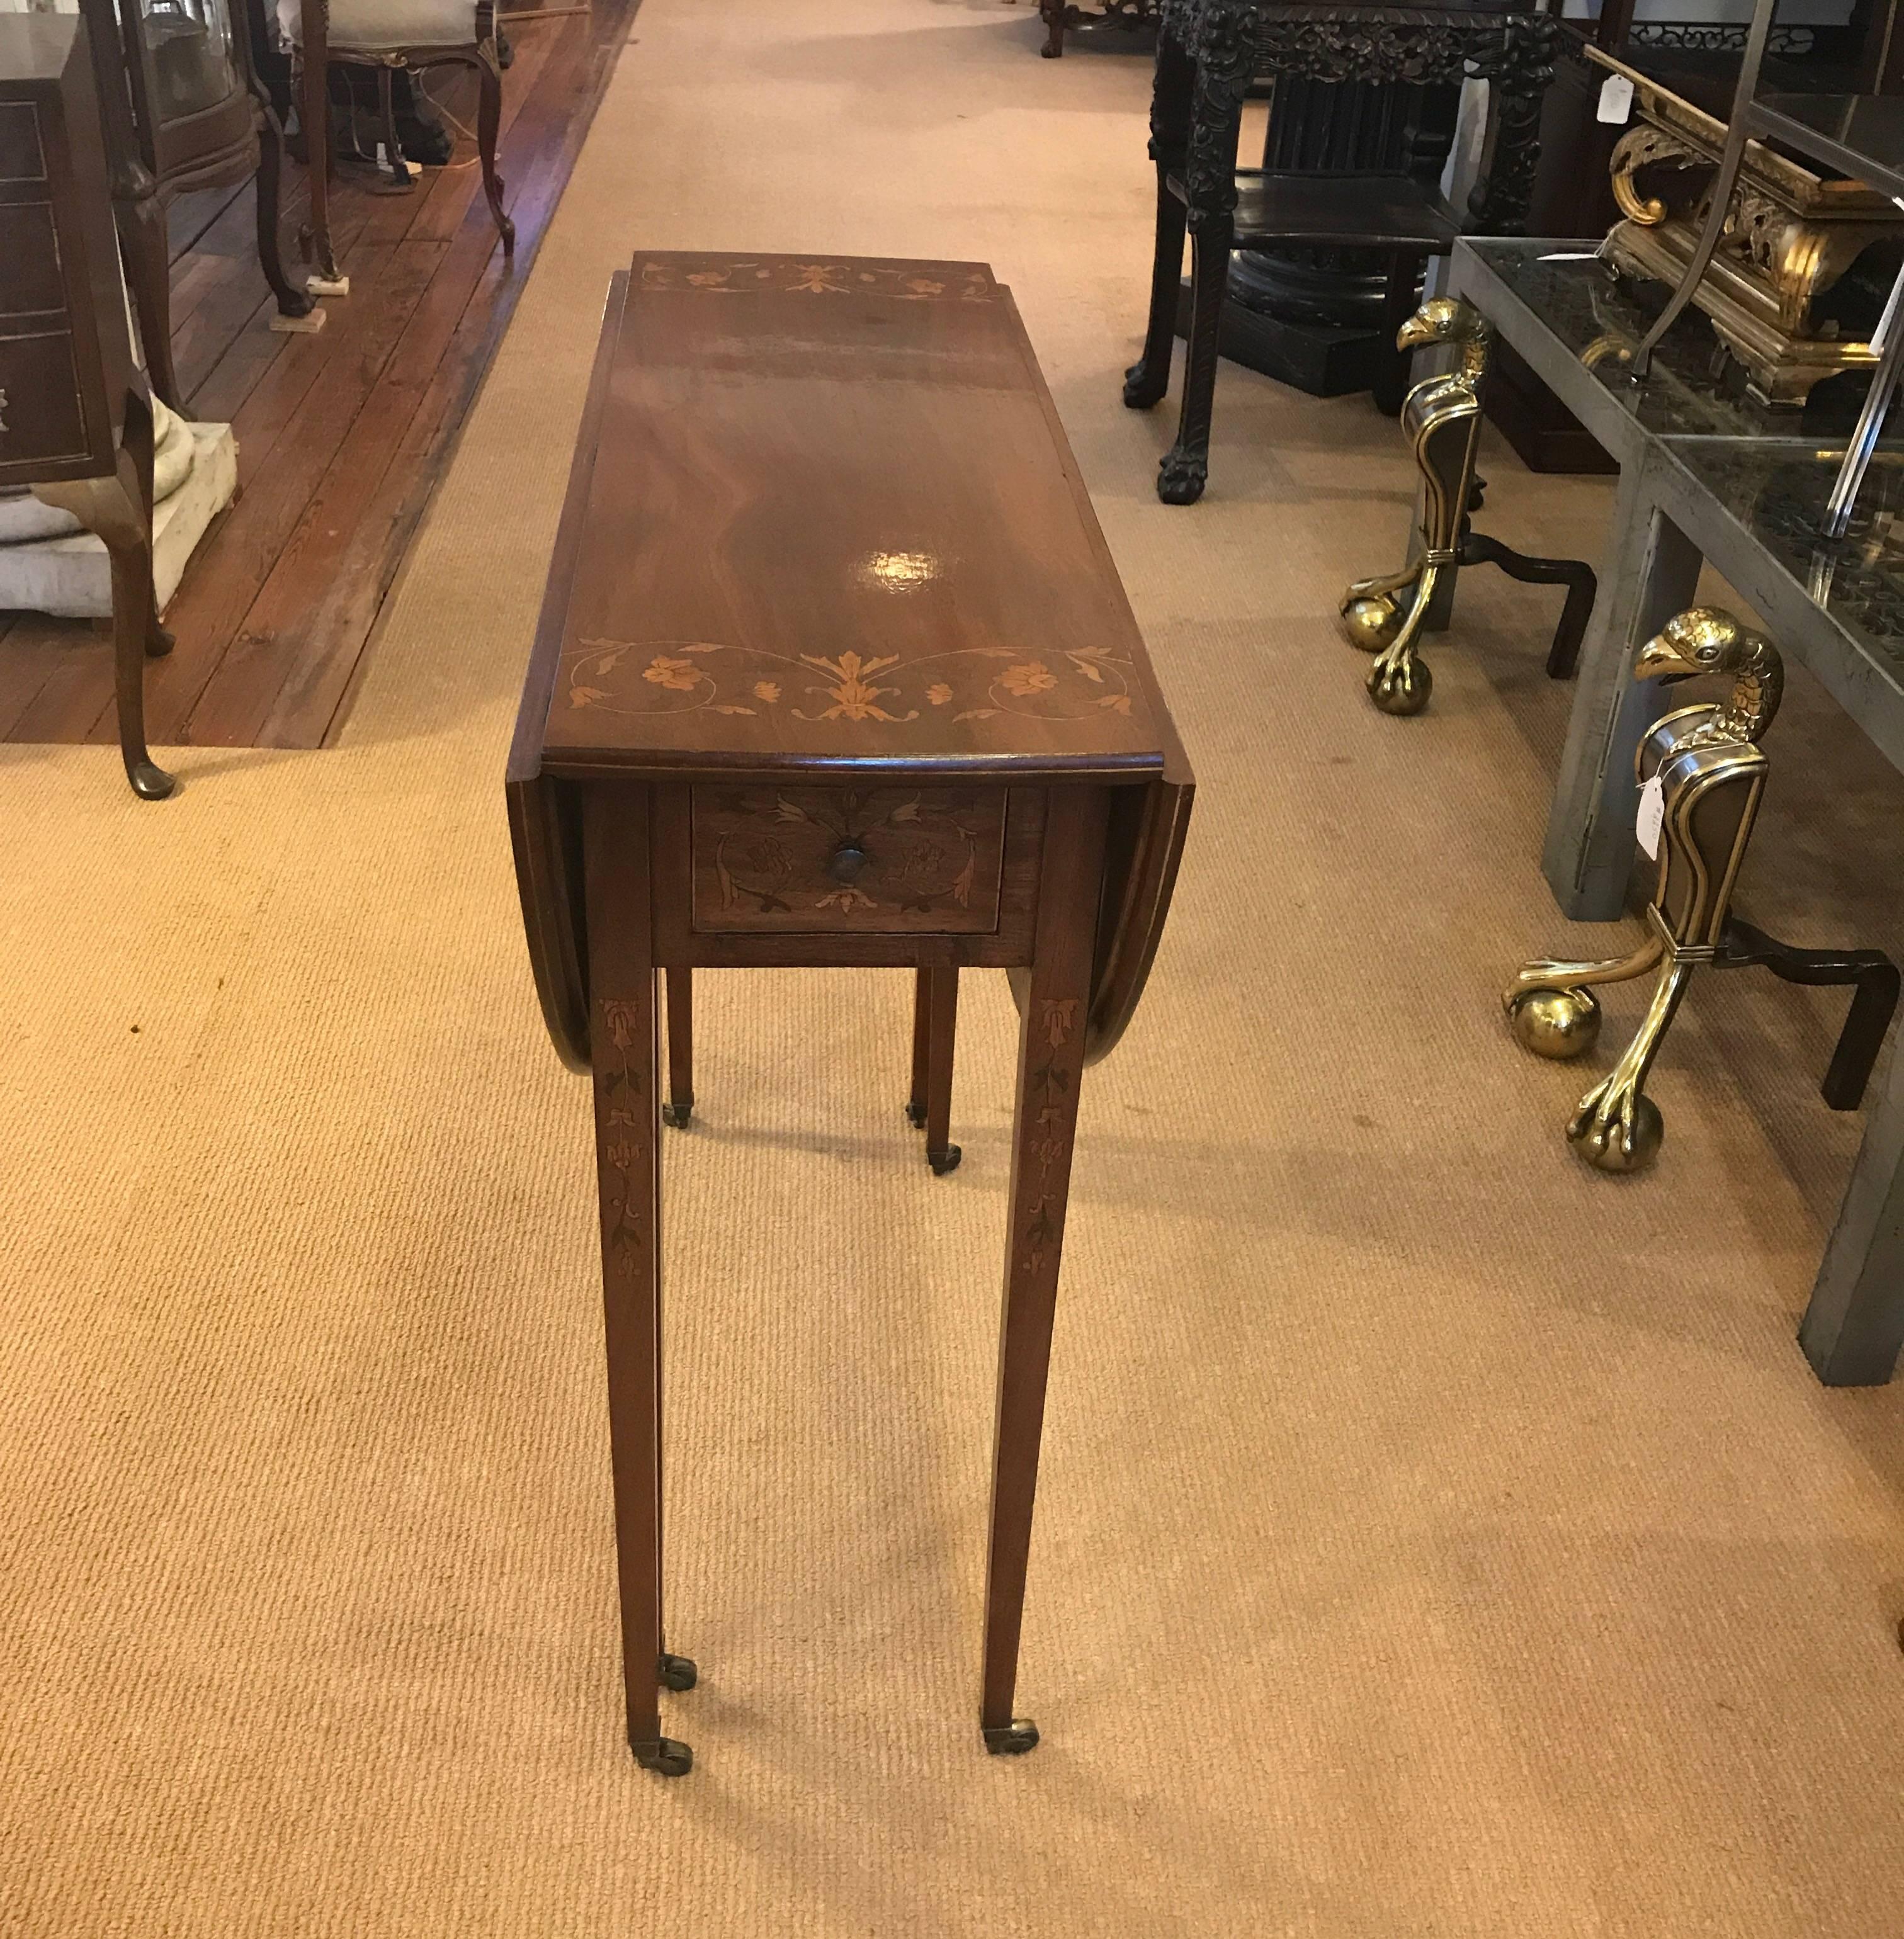 Beautiful tall and slim mahogany drop-leaf table. Larger than a Pembroke table but similarly styled. The 29 inch high table can be used as a ready when needed breakfast table. The all-over inlay along the top and leaf edges as well as on the legs